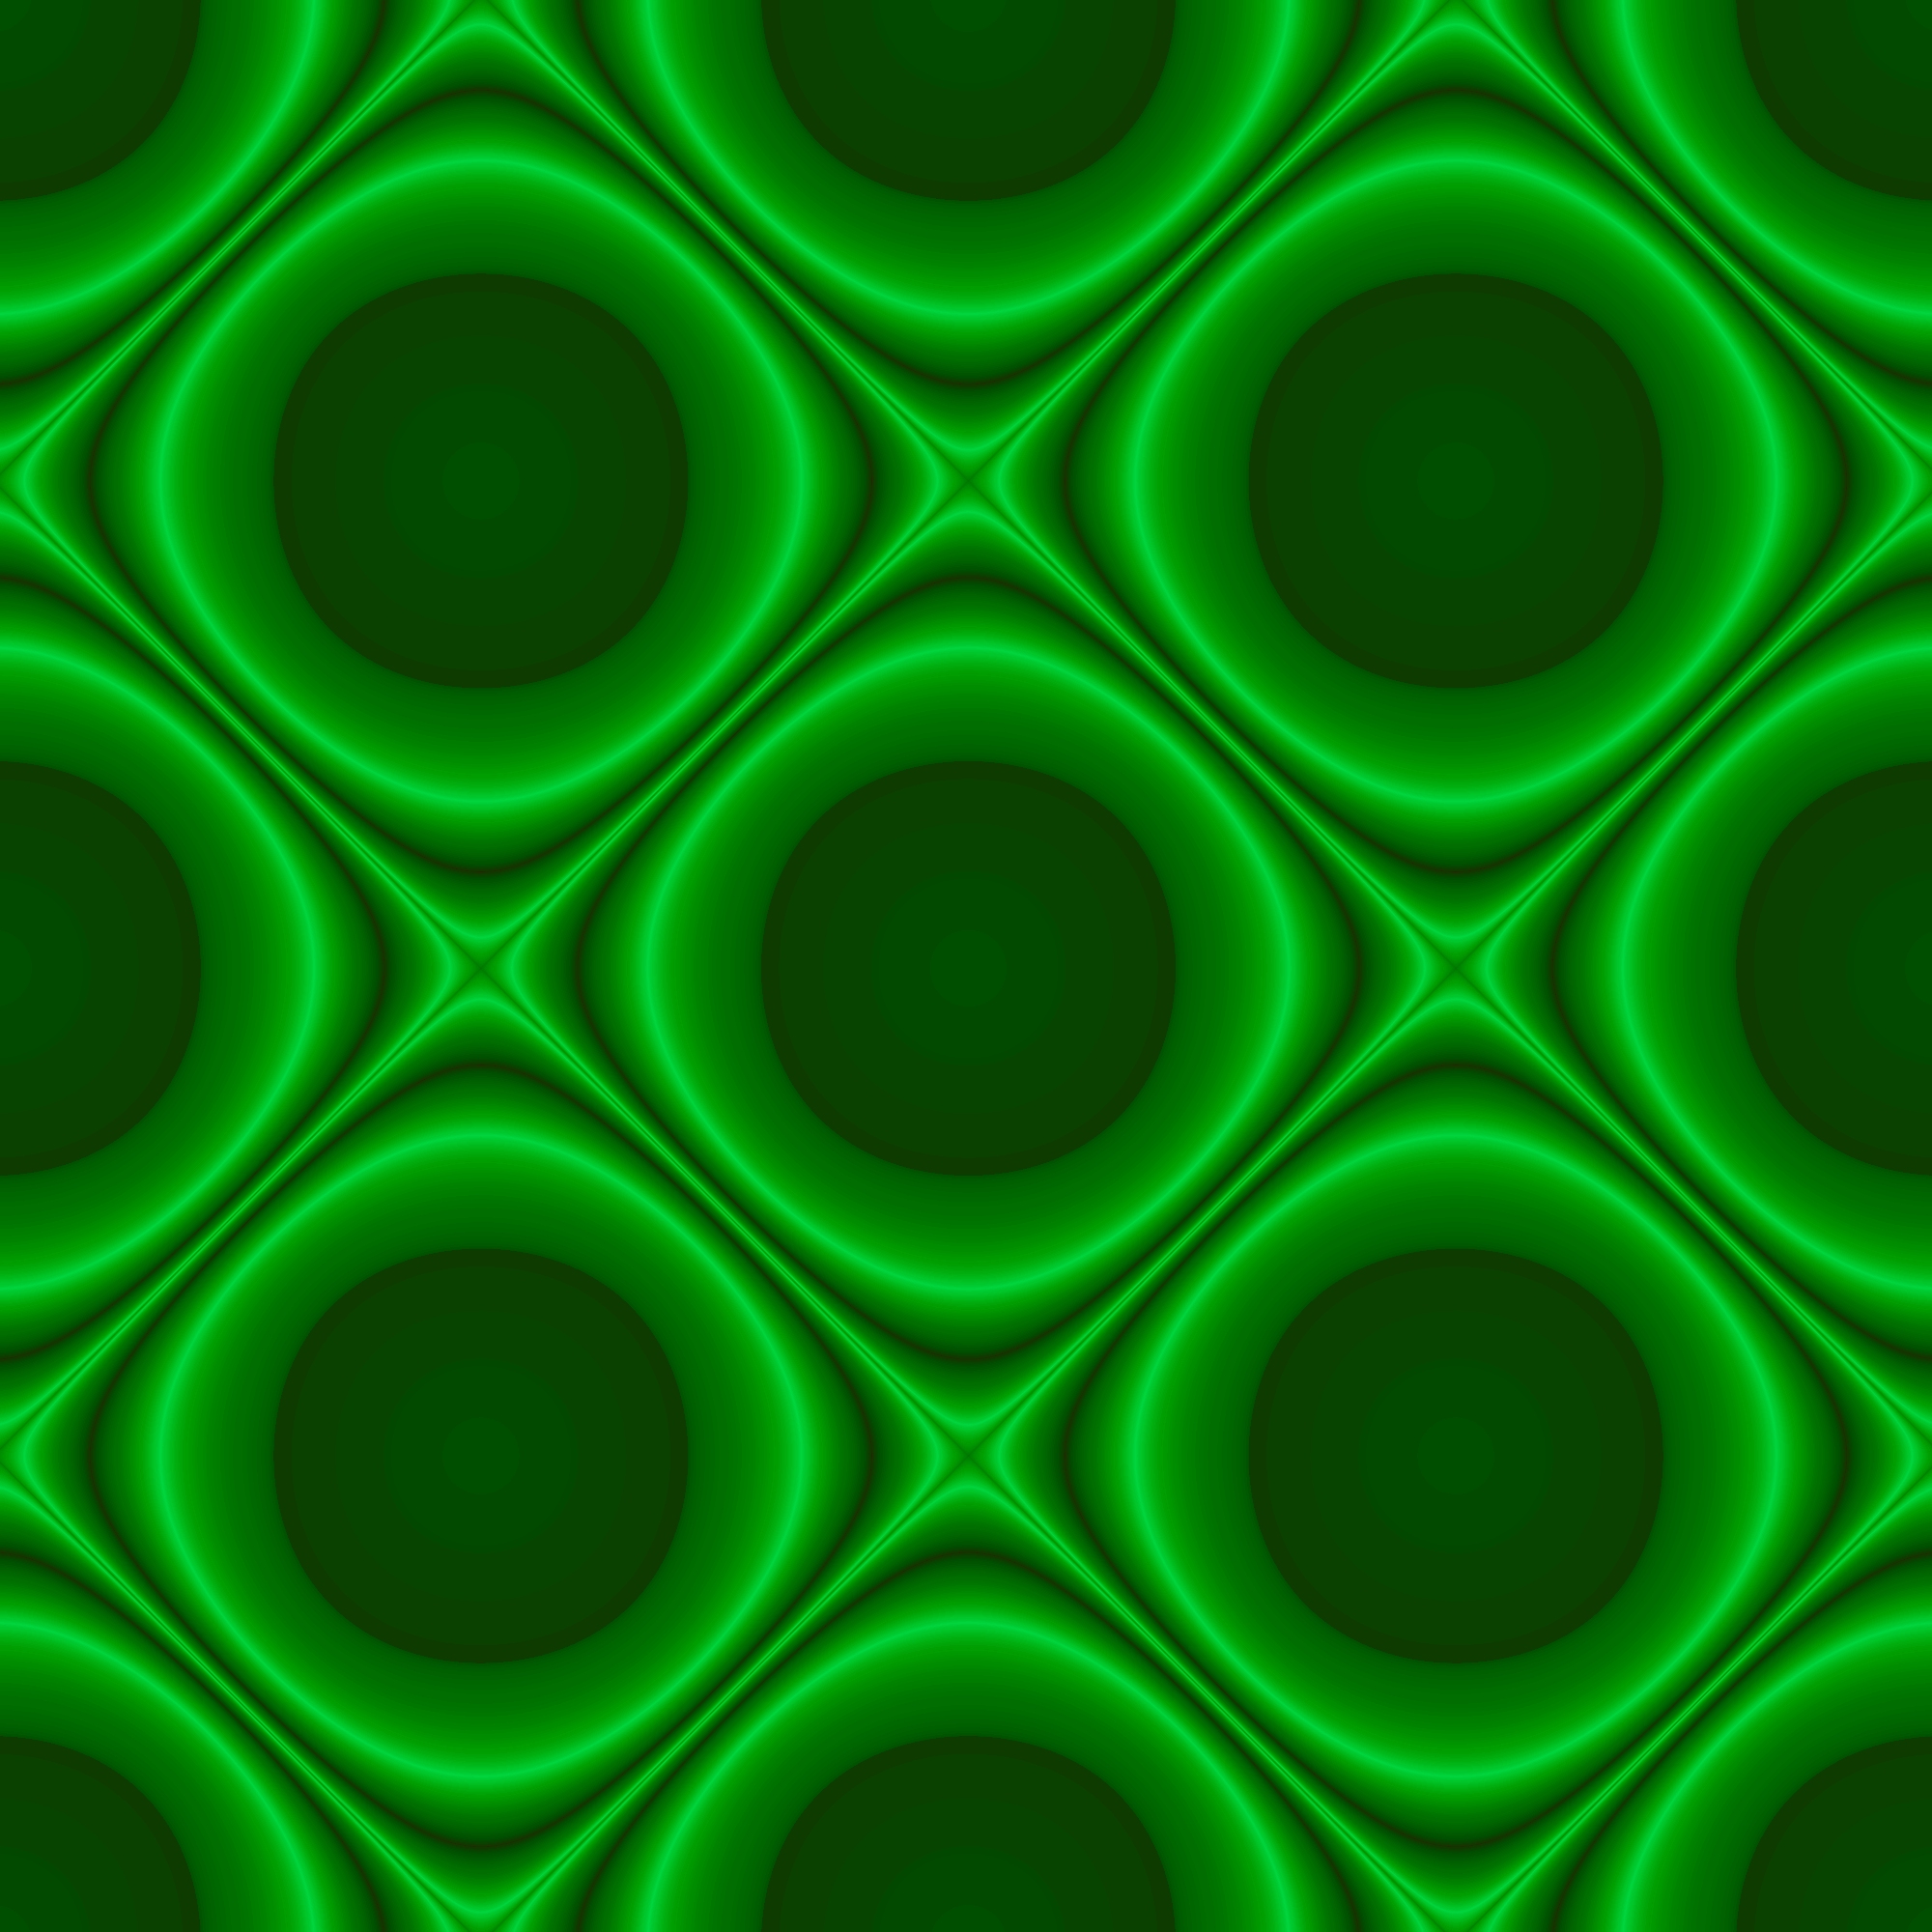 green, circles, texture, textures, form, forms, geometric, squares